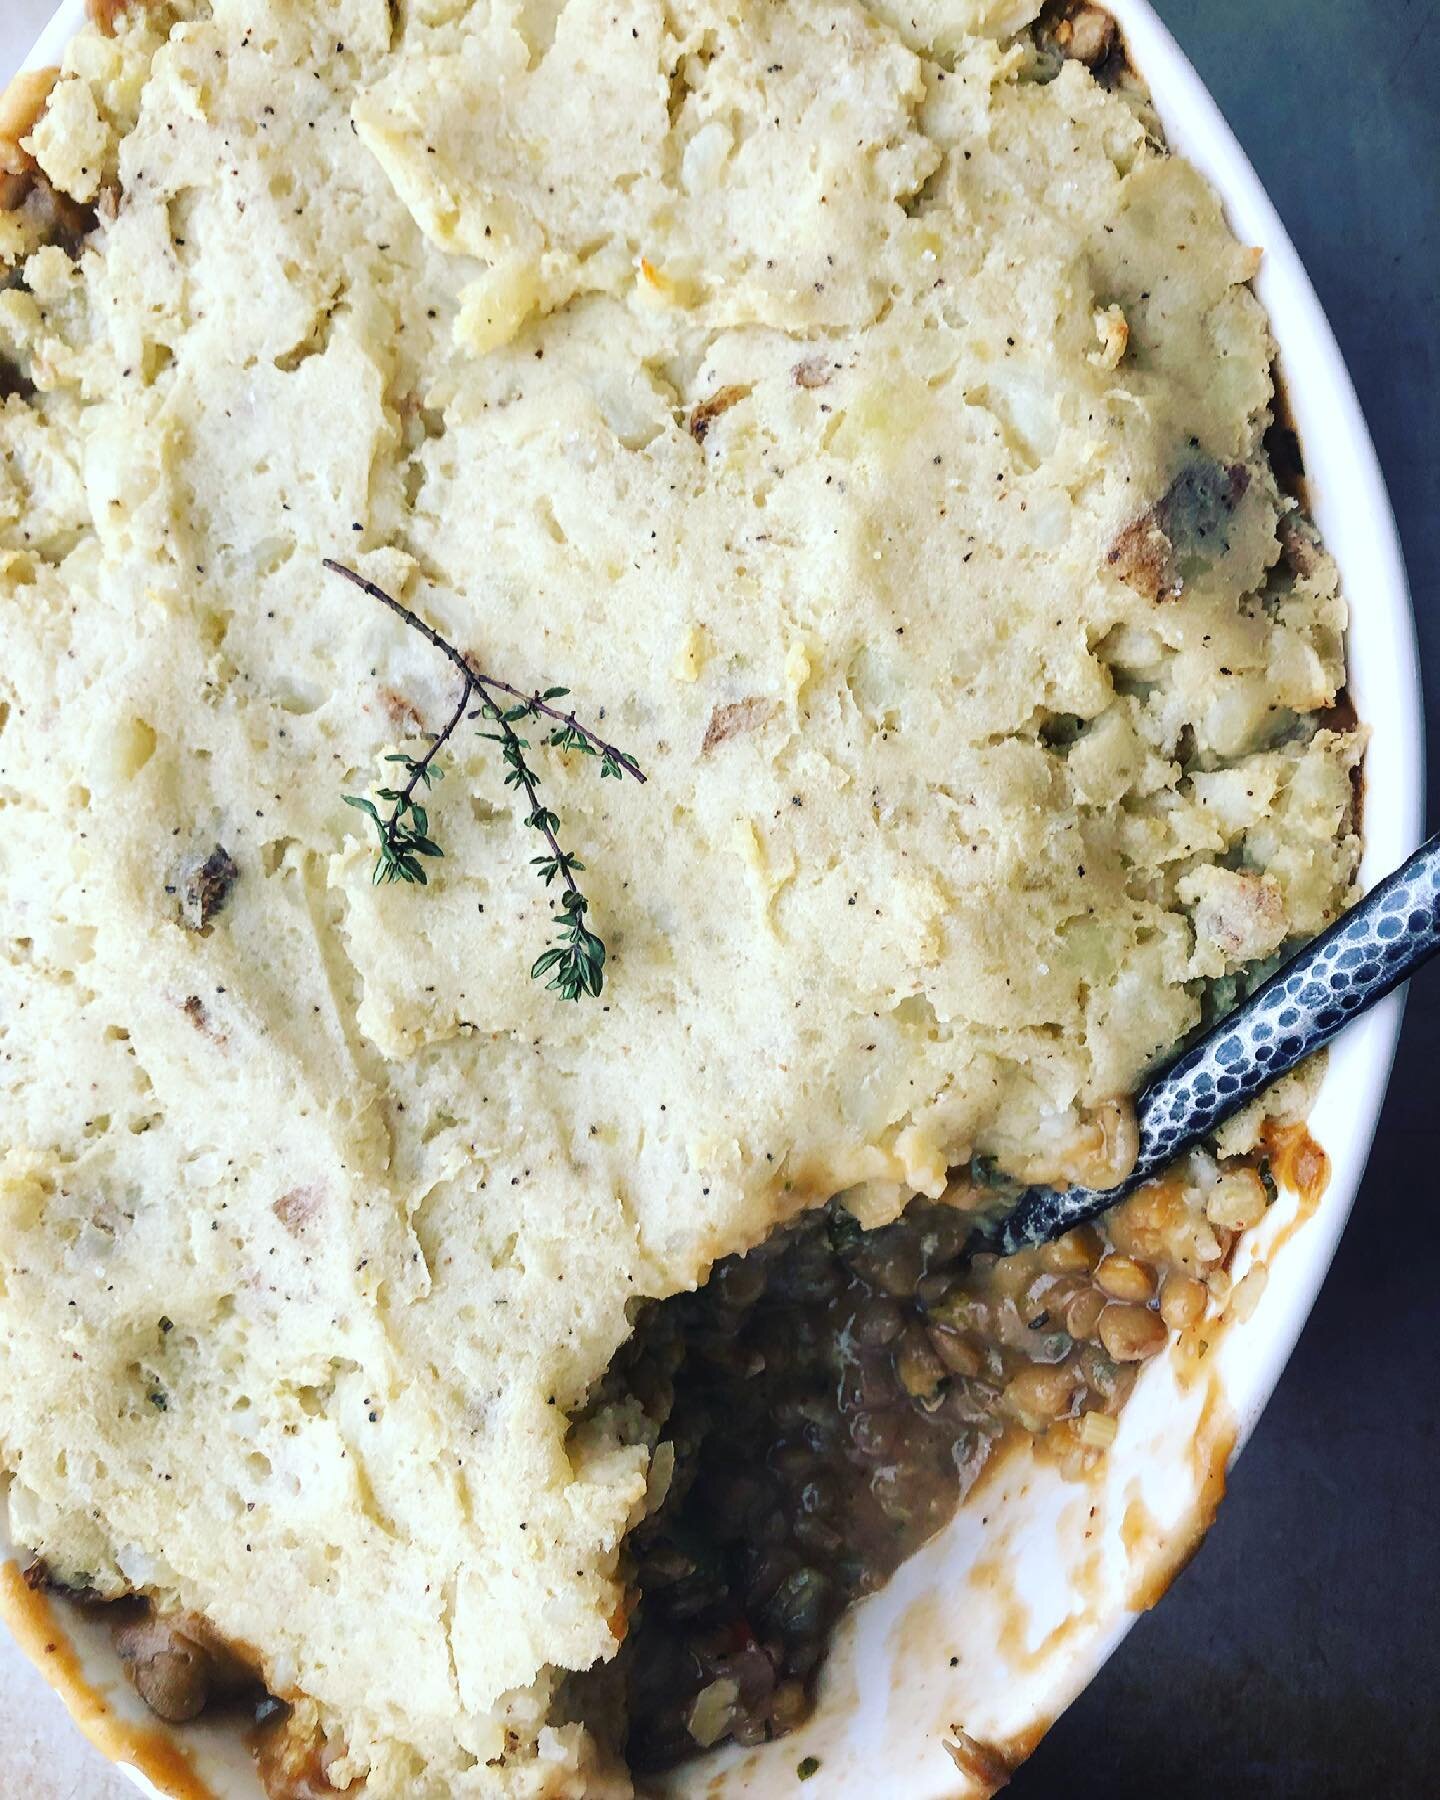 Shepard&rsquo;s pie for St. Patty&rsquo;s day 🍀
Potato 🥔 
Oat flour 
Lentils 
Carrots 🥕 
Green beans 
Veggie stock 
Onion 🧅 
Fresh and dried herbs 🌿 
.
.
.
.
#fresh #simple #meatlessmeals #plantbased #foodwisekitchen #vegan #real #food #stpatric